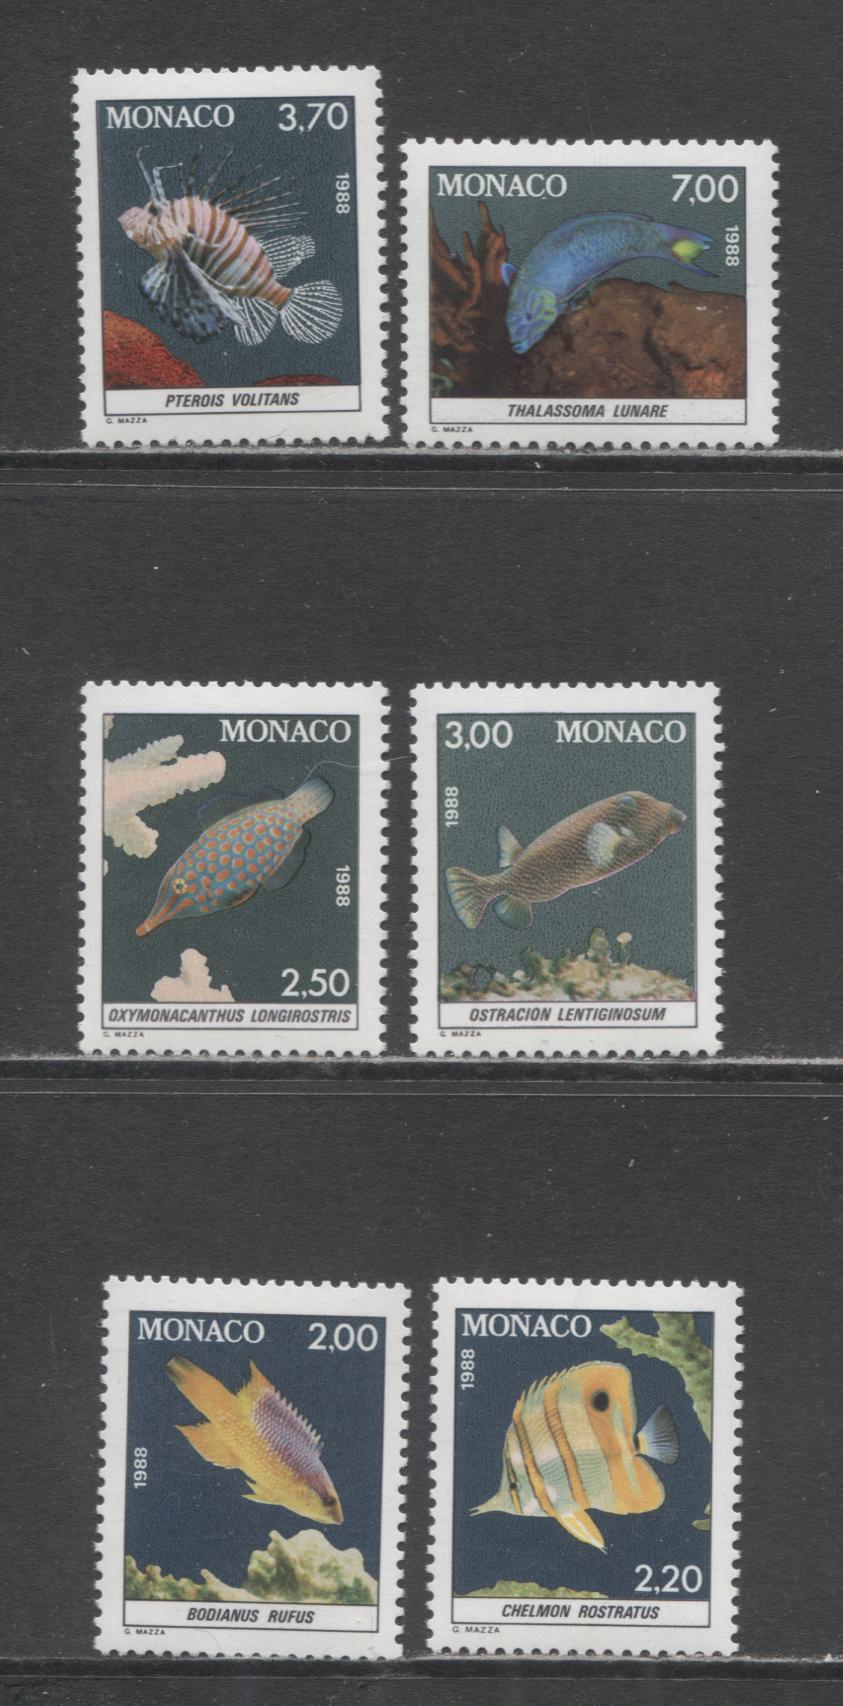 Lot 80 Monaco SC#1610-1615 1988 Aquarium Types Issue, 6 VFNH Singles, Click on Listing to See ALL Pictures, 2017 Scott Cat. $12